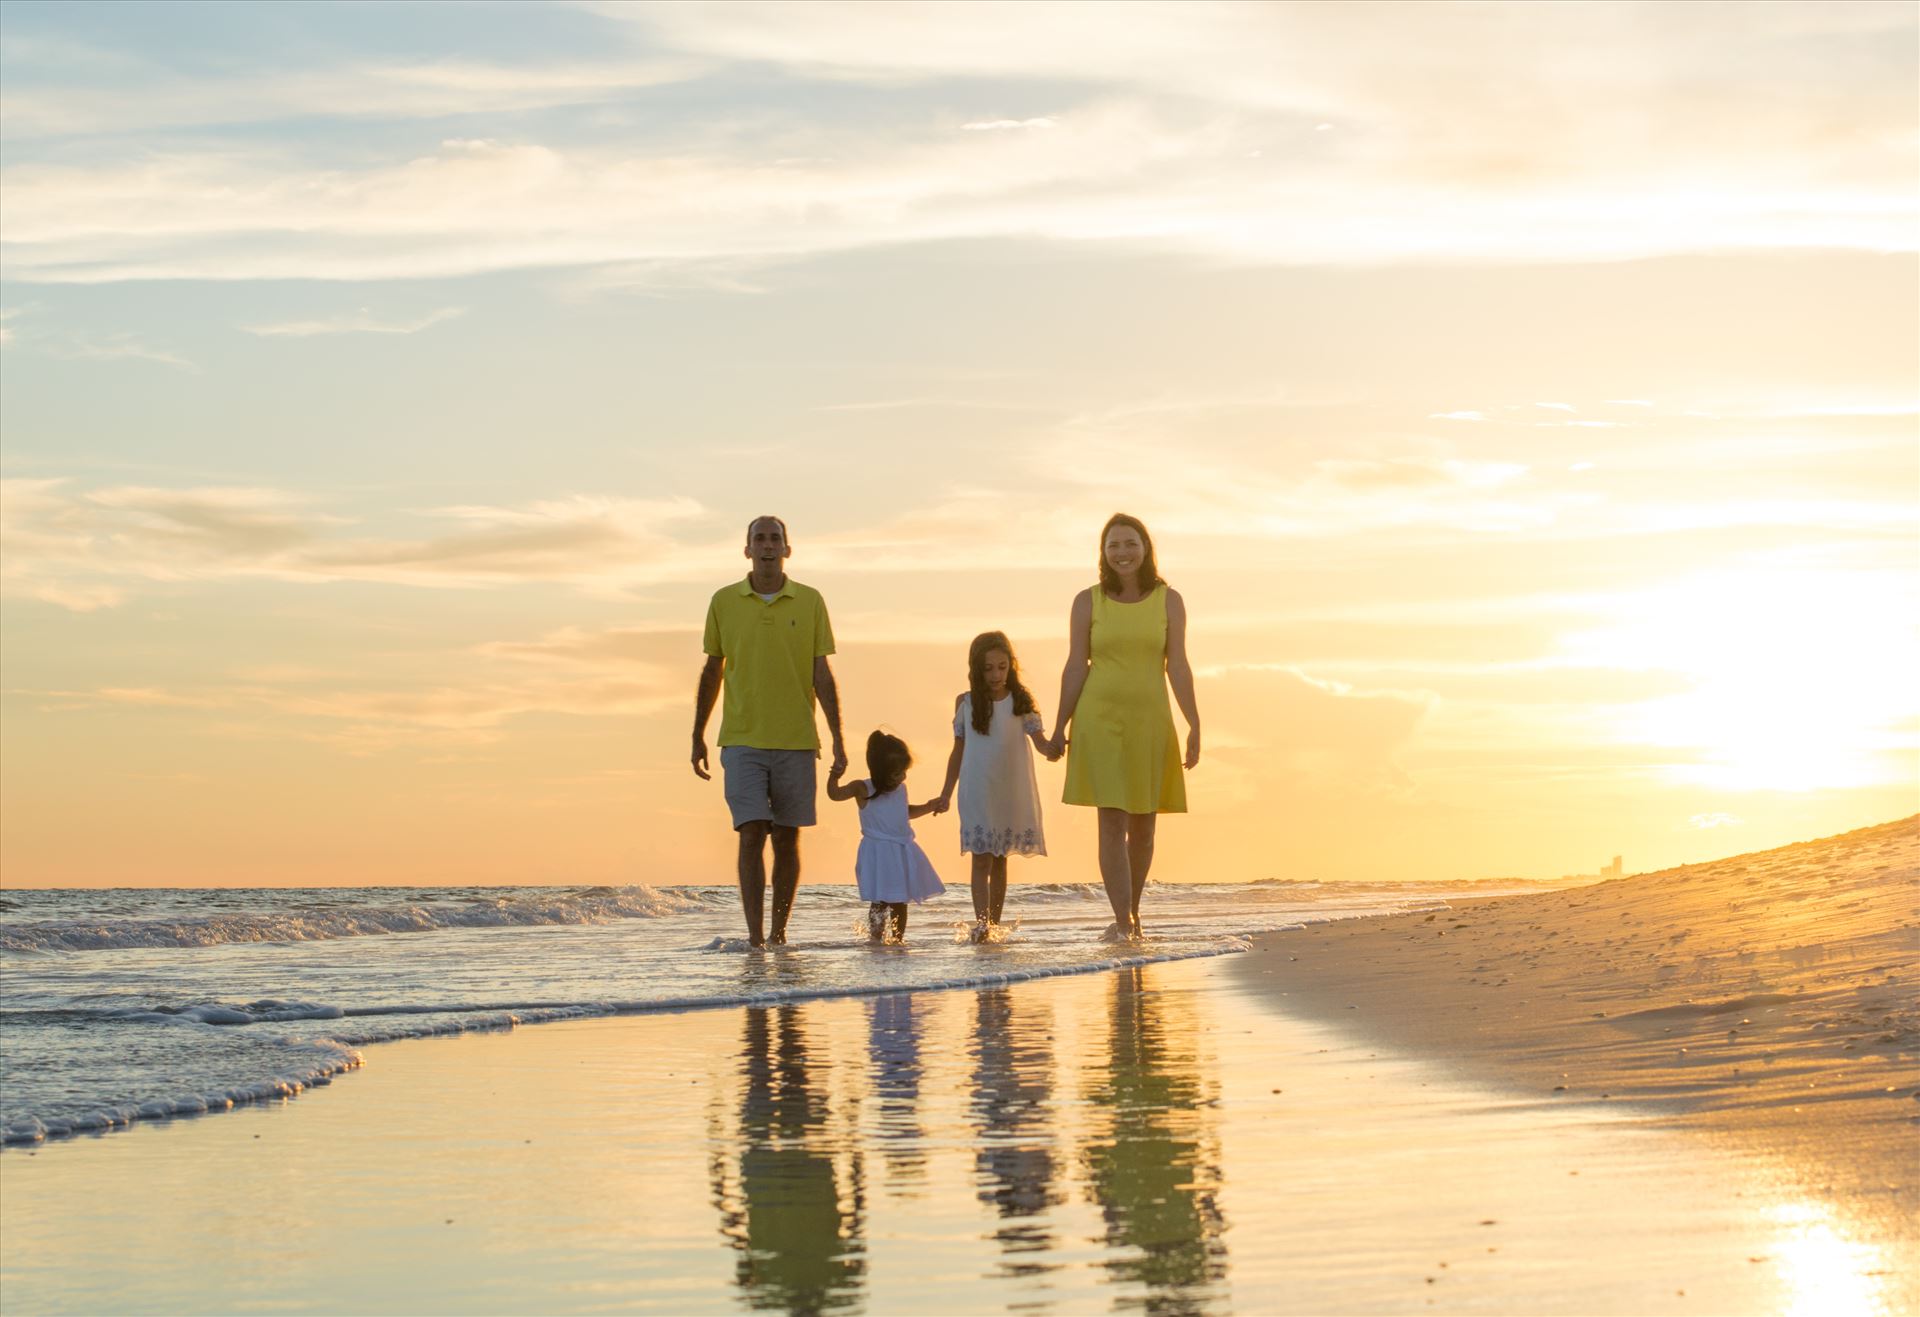 DSC_0424.jpg Carillon Beach, Fl family photo session at sunset by Holly Naughton Photography